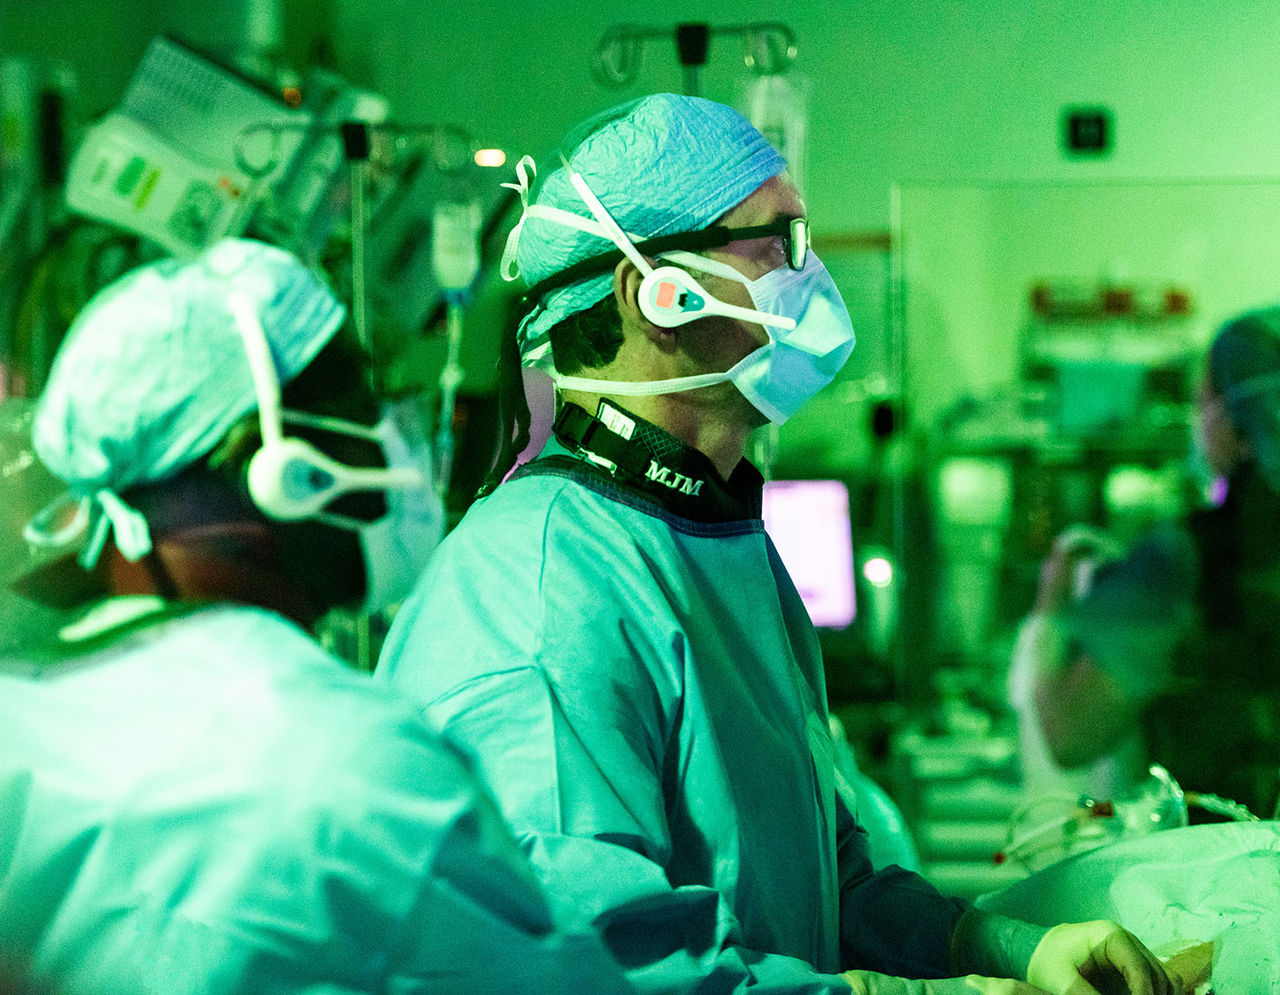 heart providers in operating room conducting electrophysiology studies